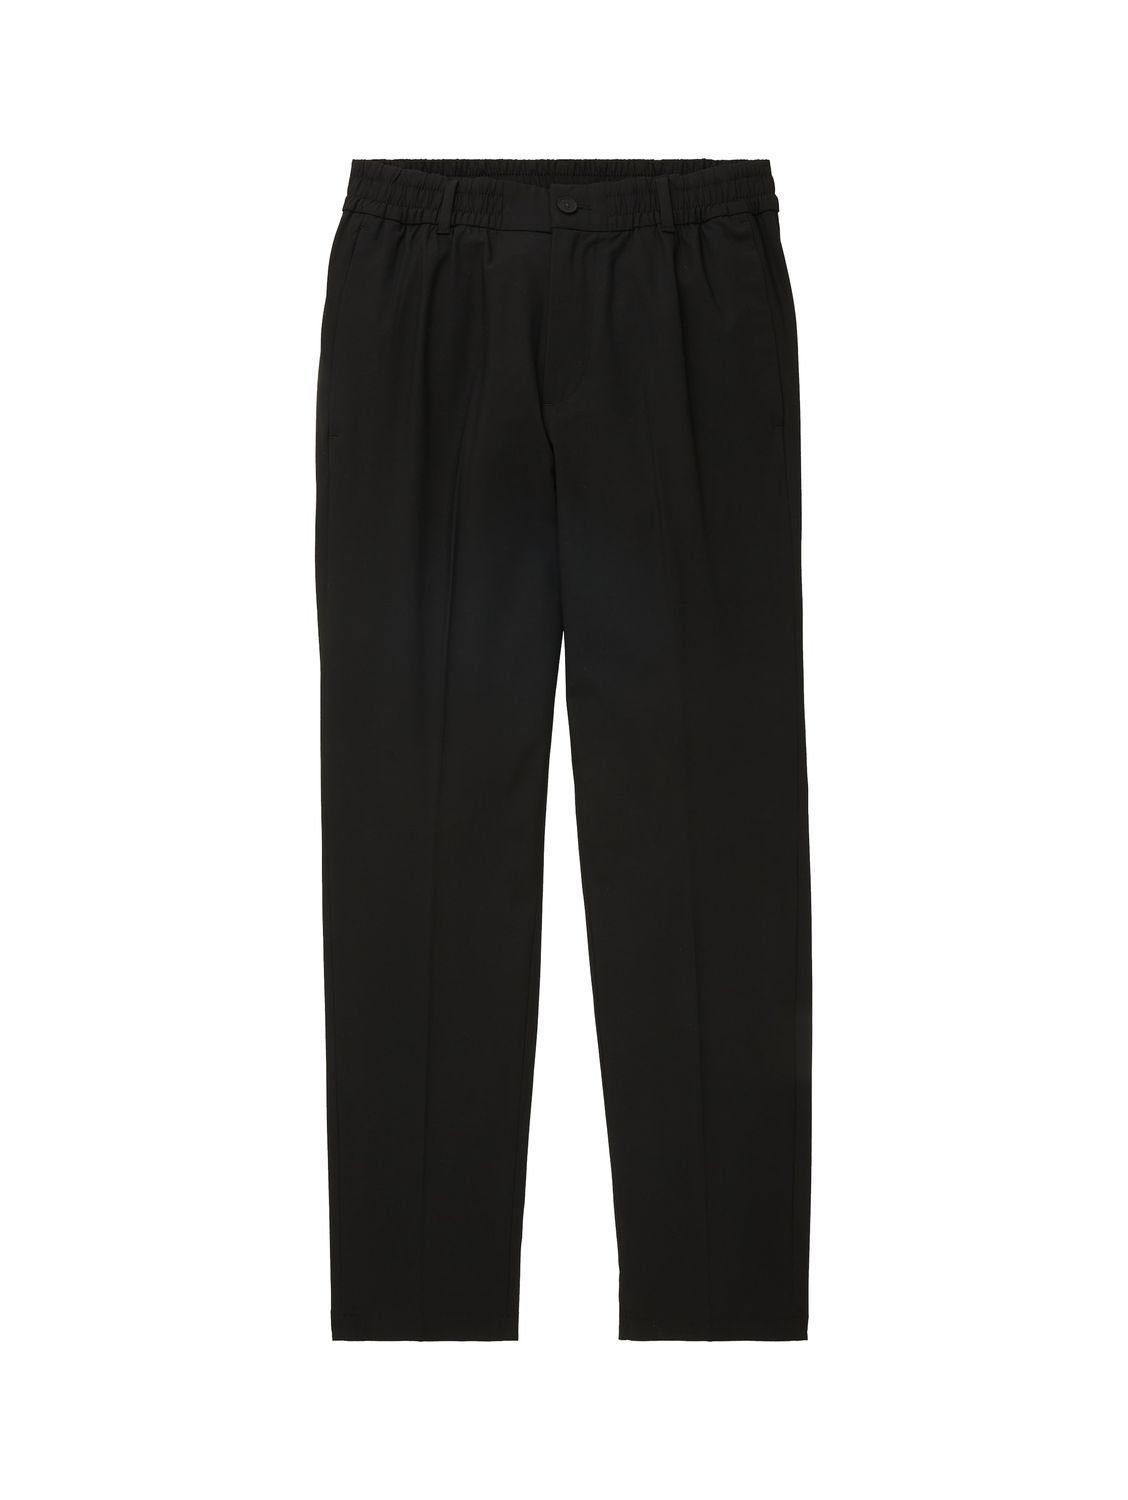 TOM TAILOR mit Denim Stretch 29999 RELAXED Black Chinohose CHINO TAPERED